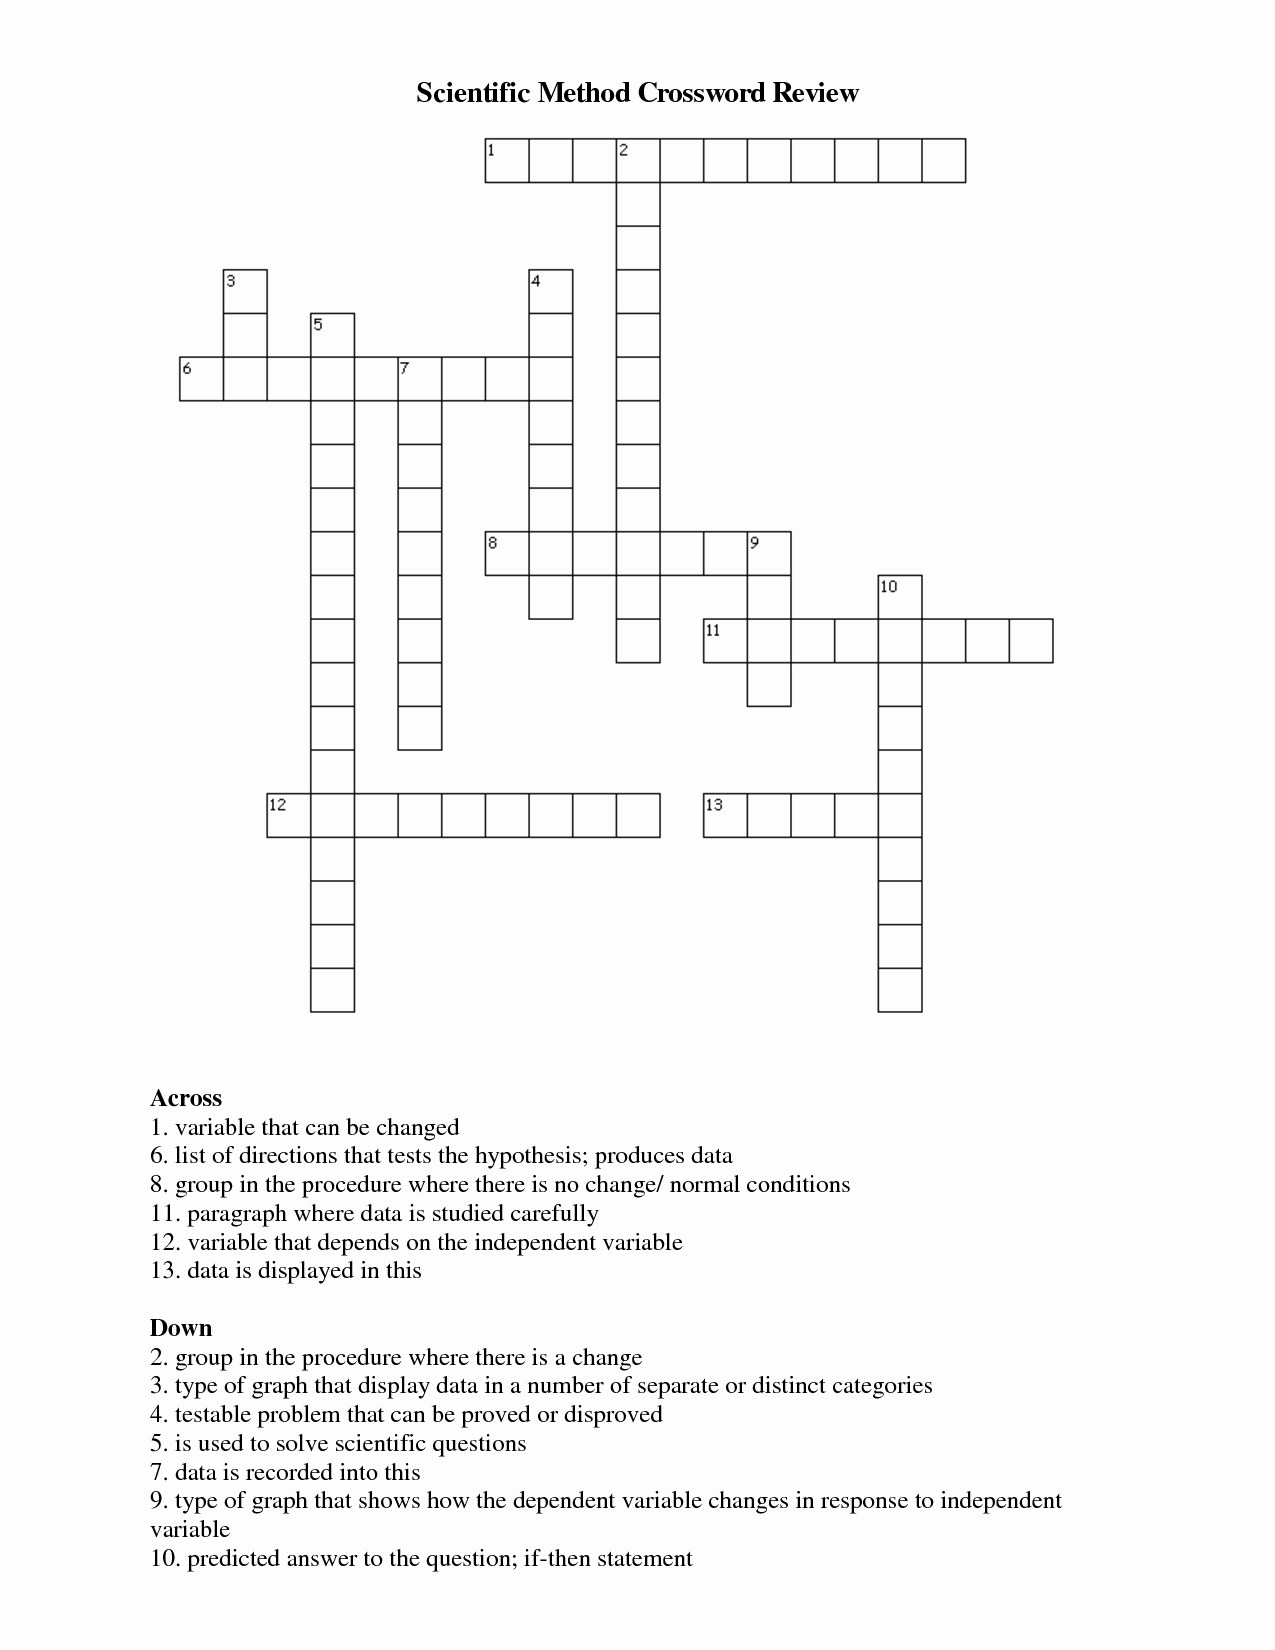 Crossword Puzzle About Science Crossword Puzzle Gallery | Jymba ...